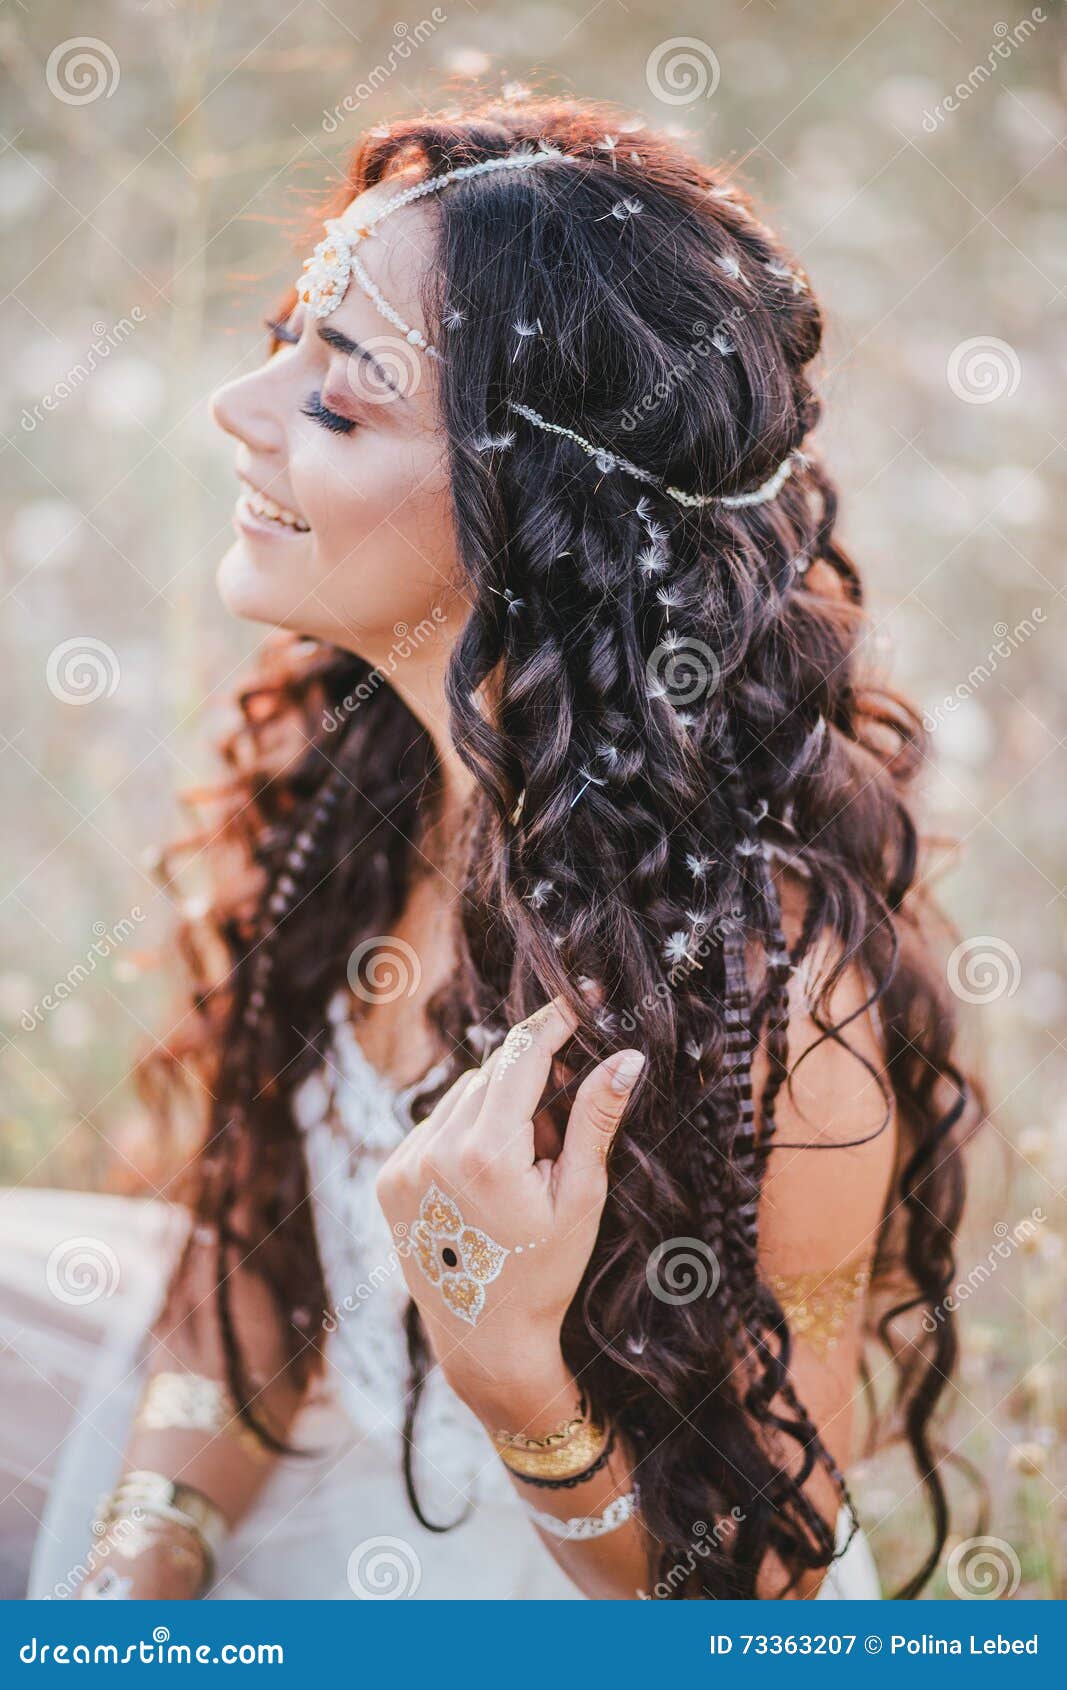 Beautiful Young Woman with Long Curly Hair Dressed in Boho Style Dress  Posing in a Field with Dandelions Stock Image - Image of lace, hair:  73363207